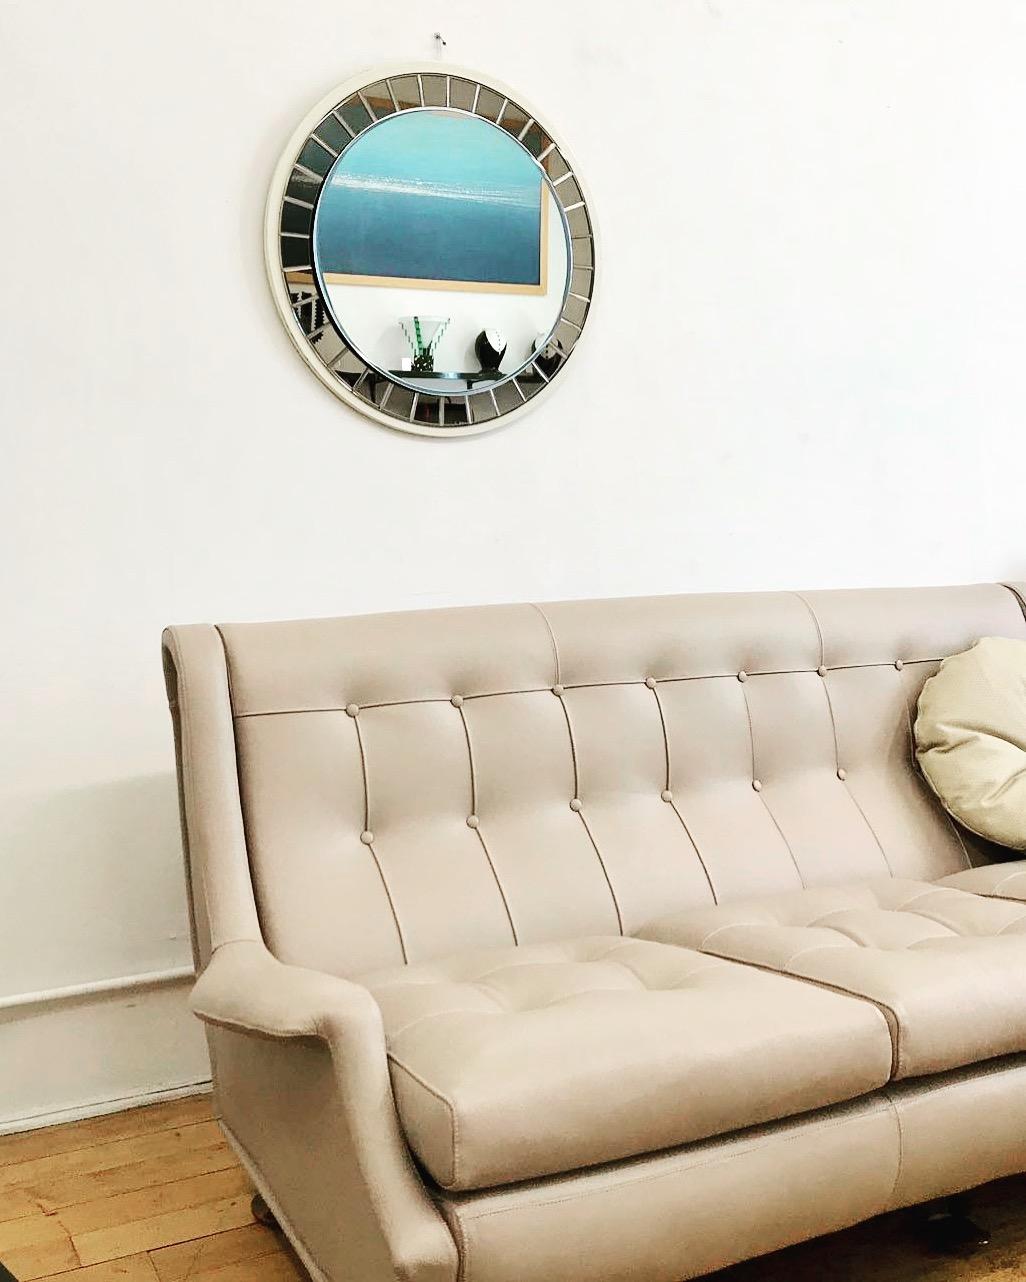 Regent sofa designed by Marco Zanuso and manufactured for Arflex in the 1960s. This Regent sofa has been completely restored and reupholstered with luxury Italian leather in a beige color which can be combined perfectly with lighter or darker woods